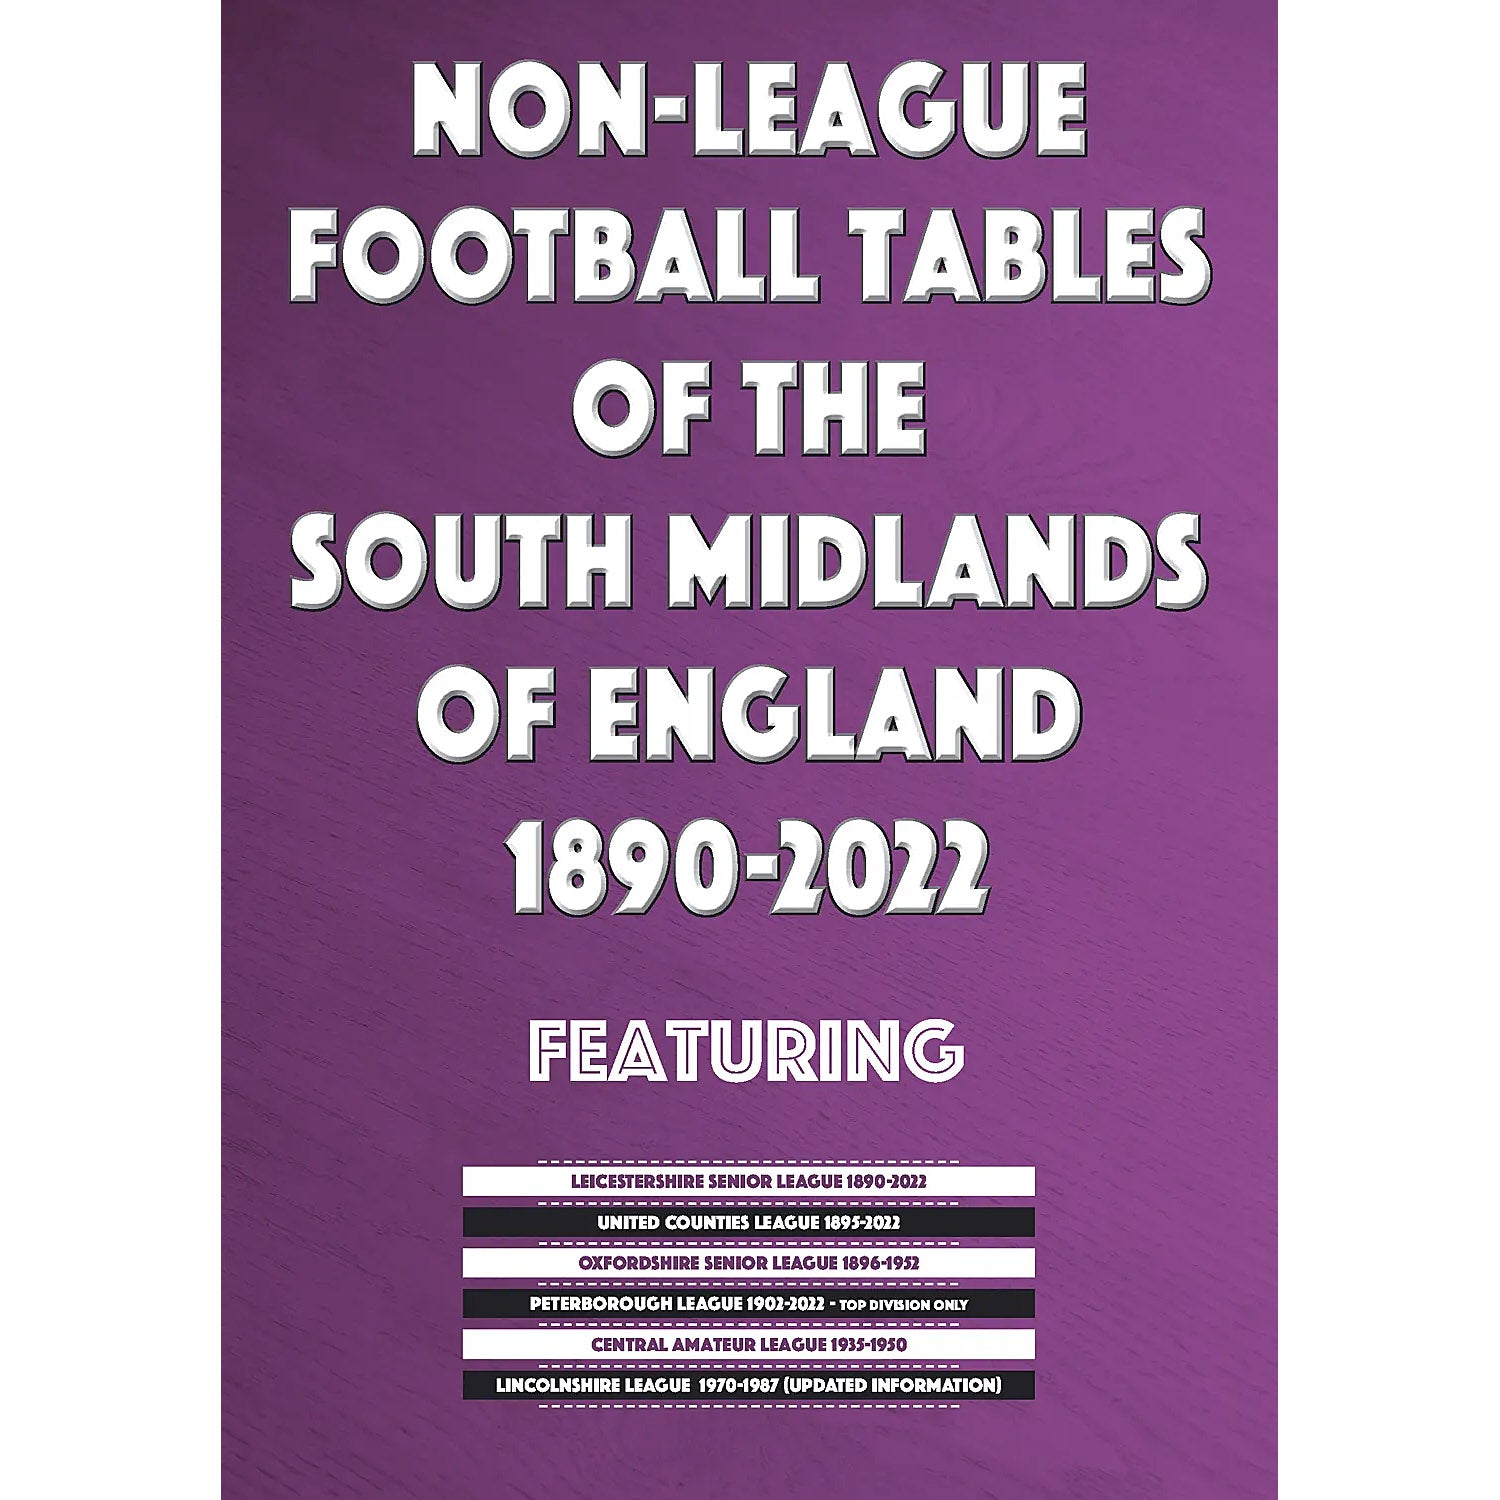 Non-League Football Tables of the South Midlands of England 1890-2022